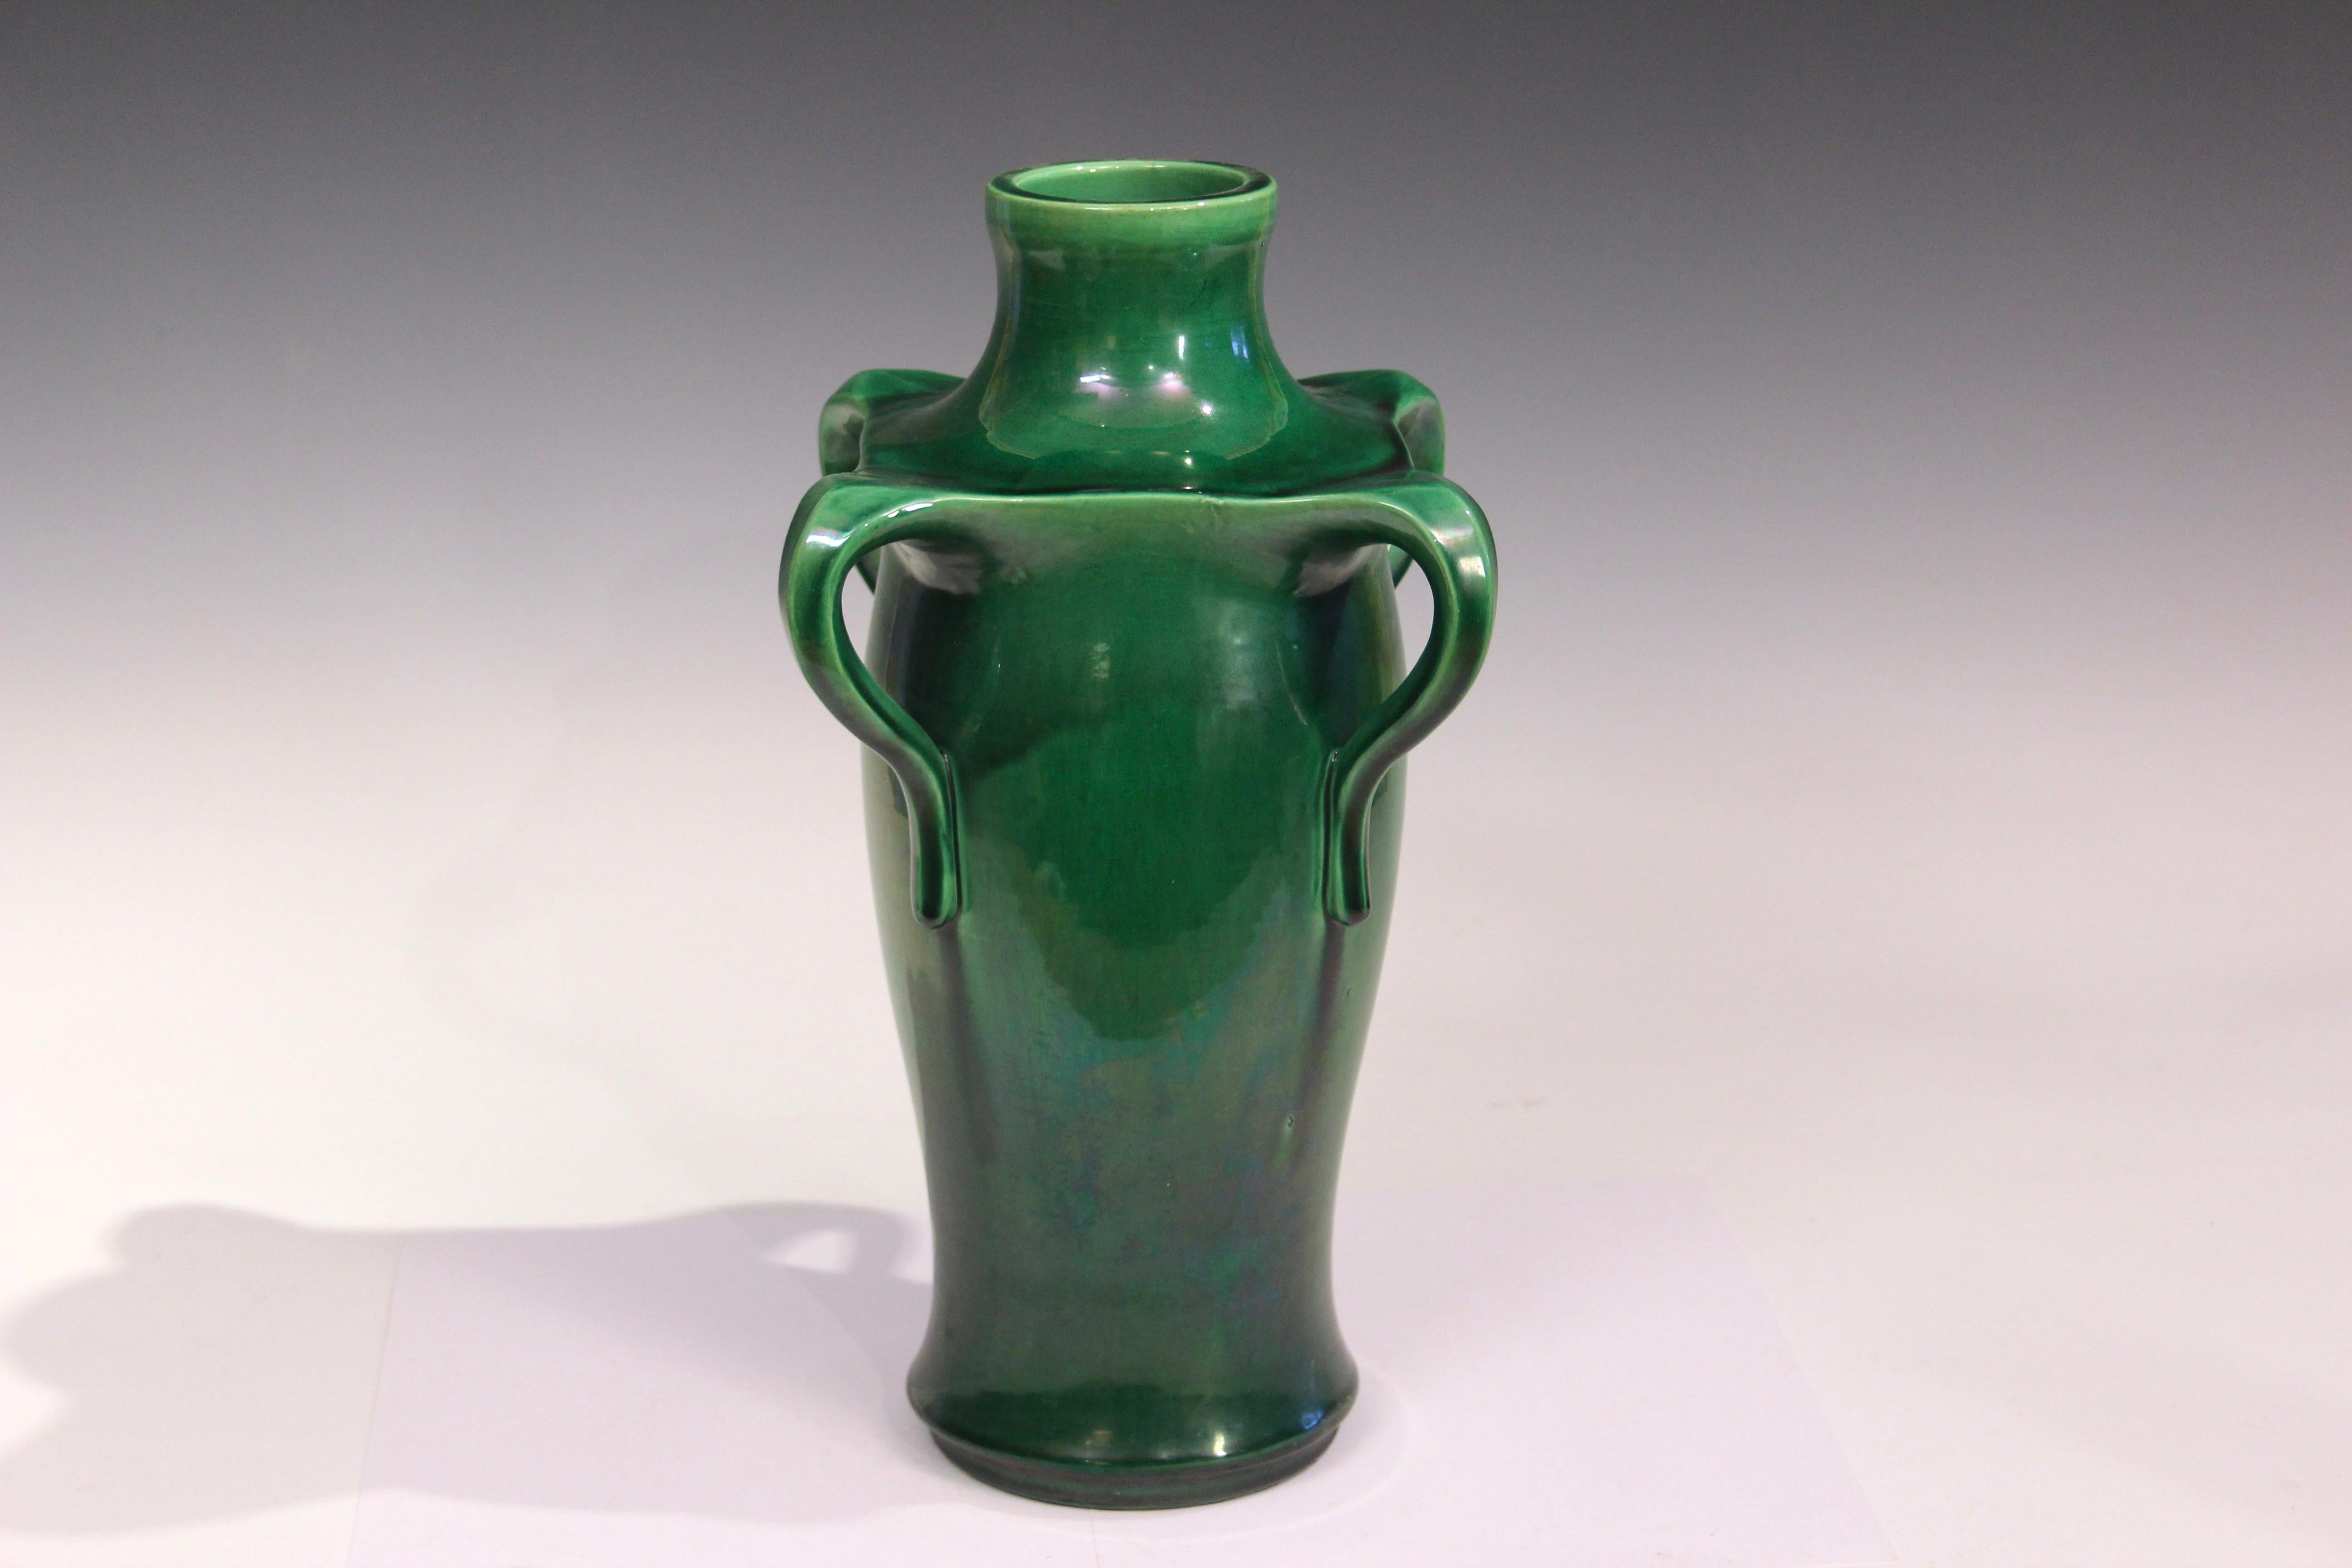 Antique Awaji pottery Art Nouveau form vase with four willowy handles emanating from a squared shoulder in deep green glaze, circa 1910.  Measures: 14 1/2